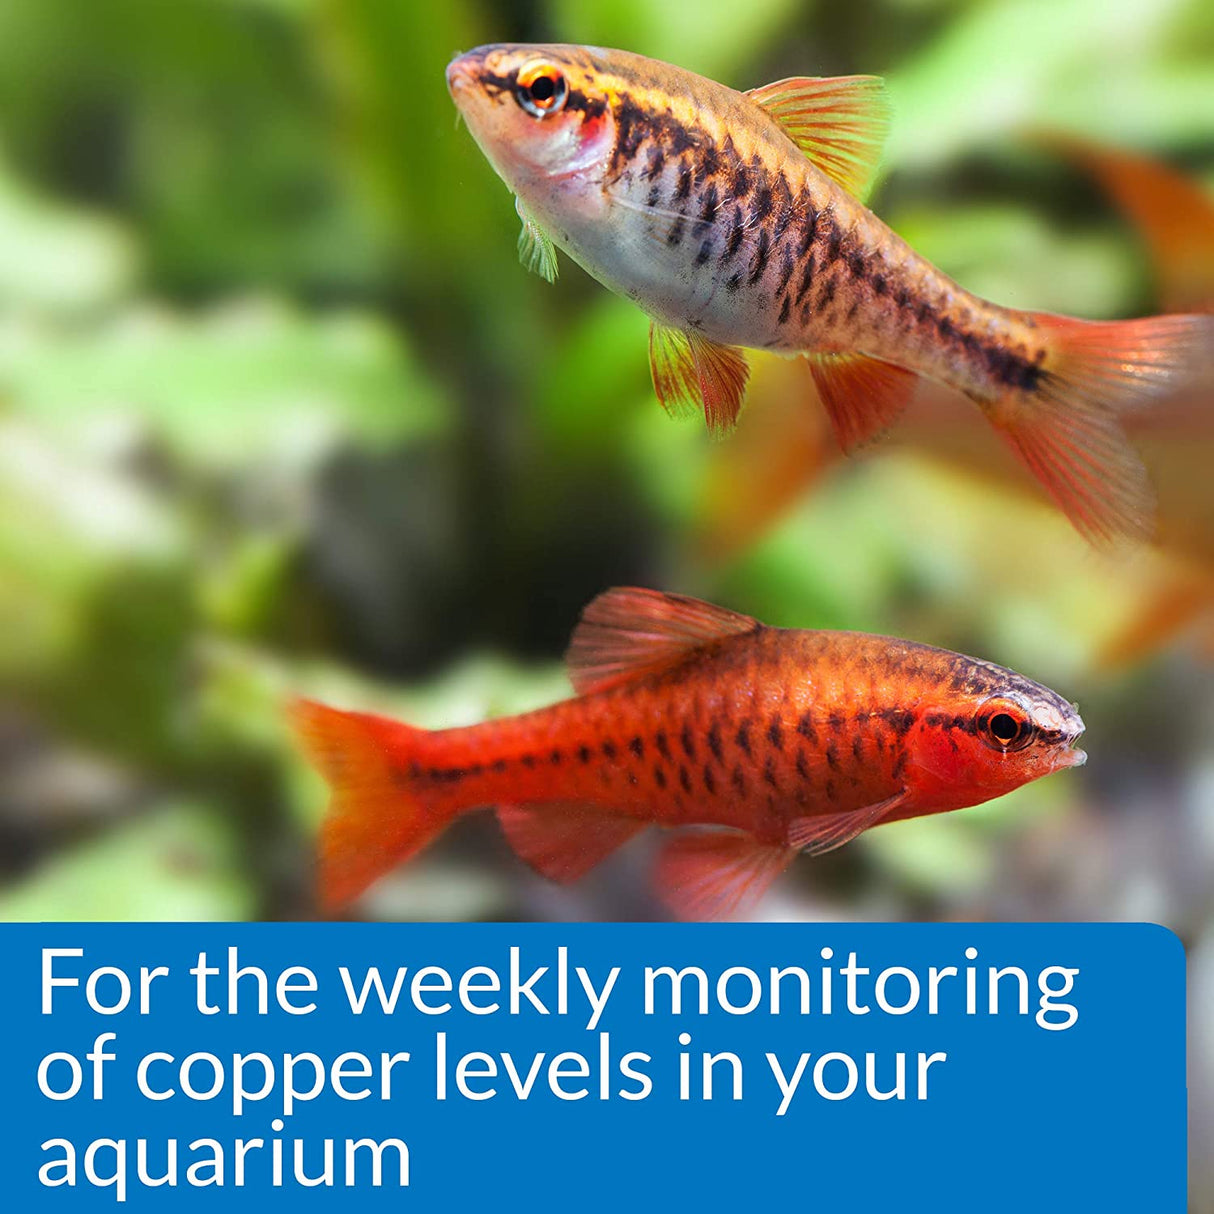 1 count API Copper Cu+ Test Kit Monitor Copper when Medicating in Freshwater and Saltwater Aquariums